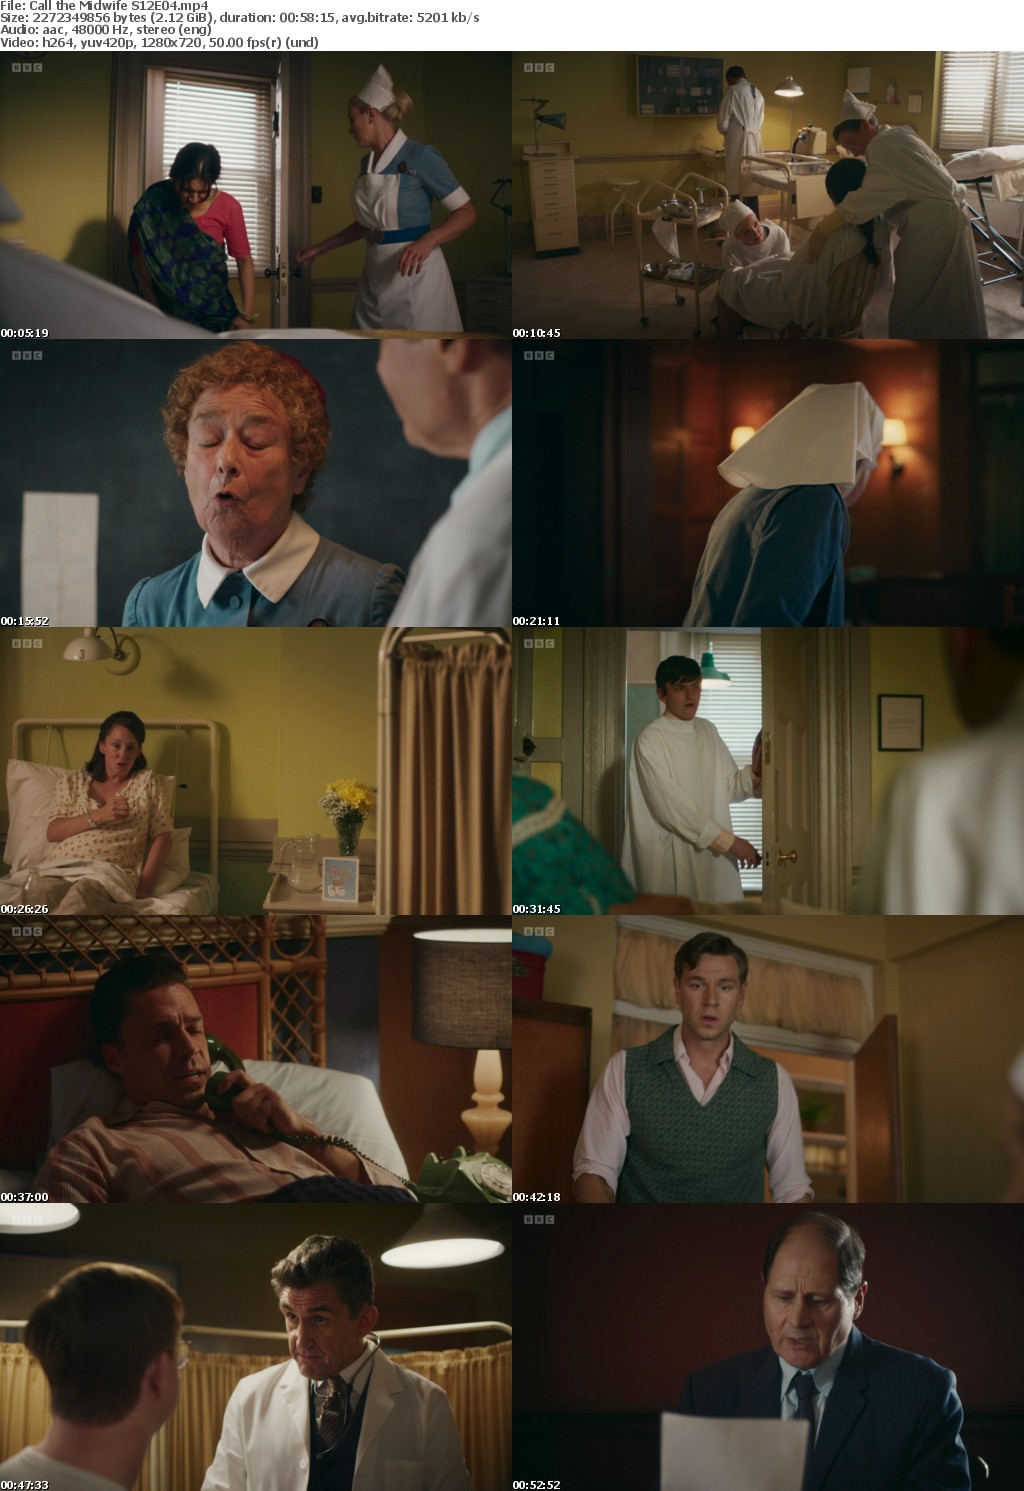 Call the Midwife S12E04 (1280x720p HD, 50fps, soft Eng subs)